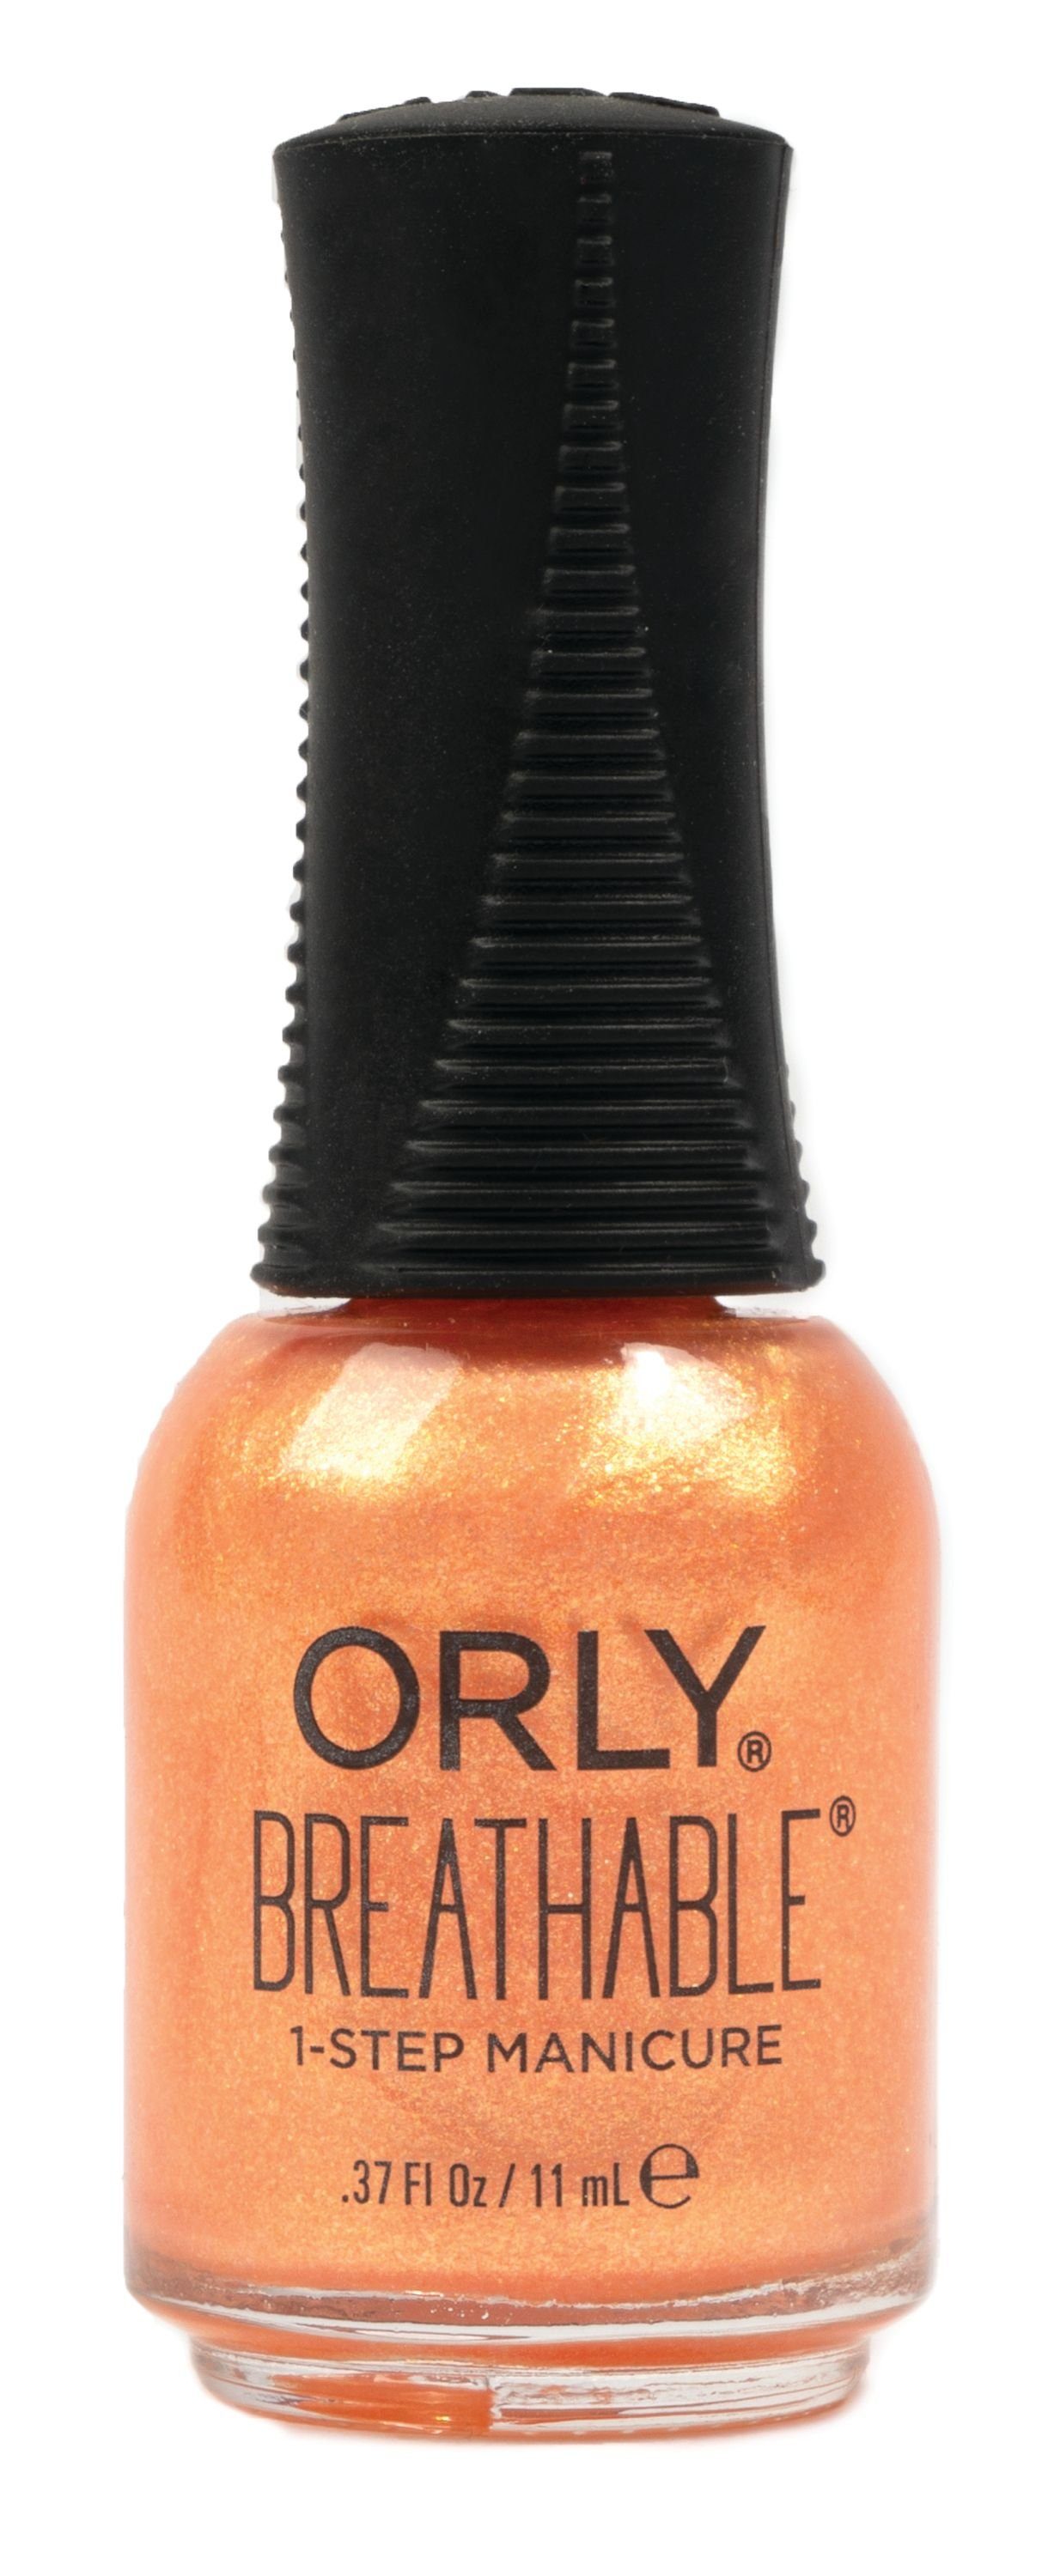 11 Breathable GOT ORLY REAL, Nagellack ml CITRUS ORLY